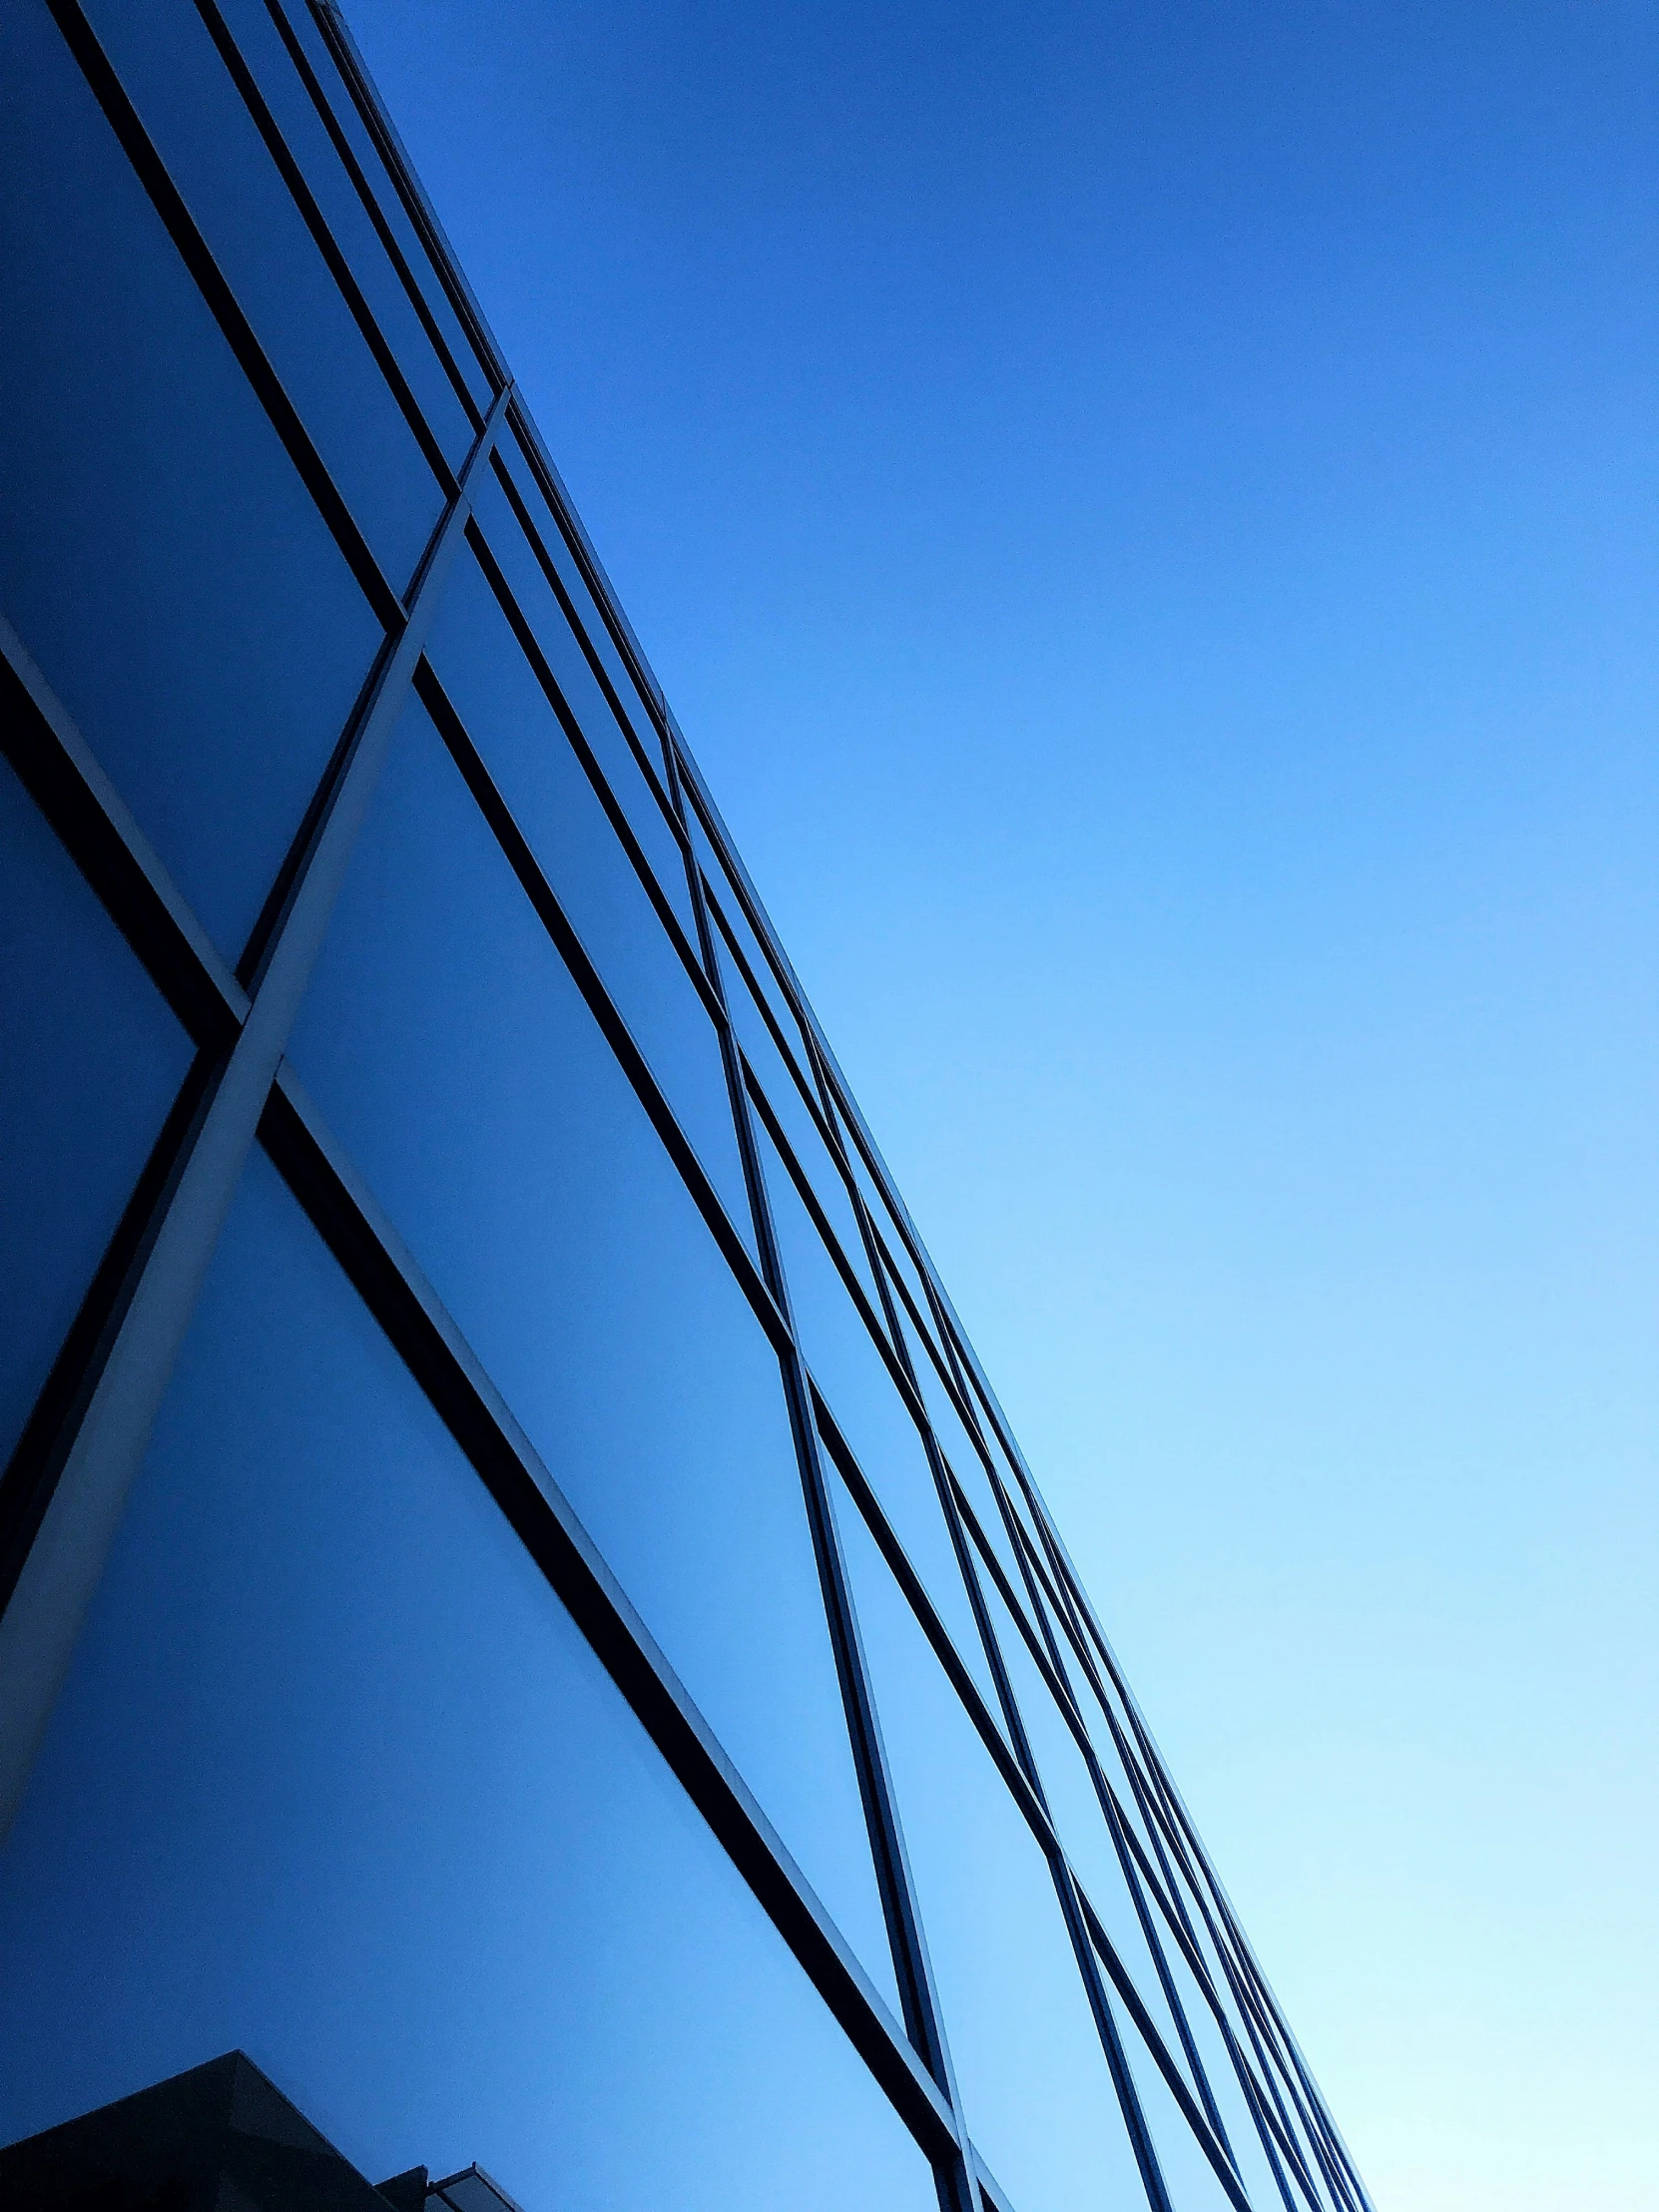 the blue sky reflected in the side of an office building